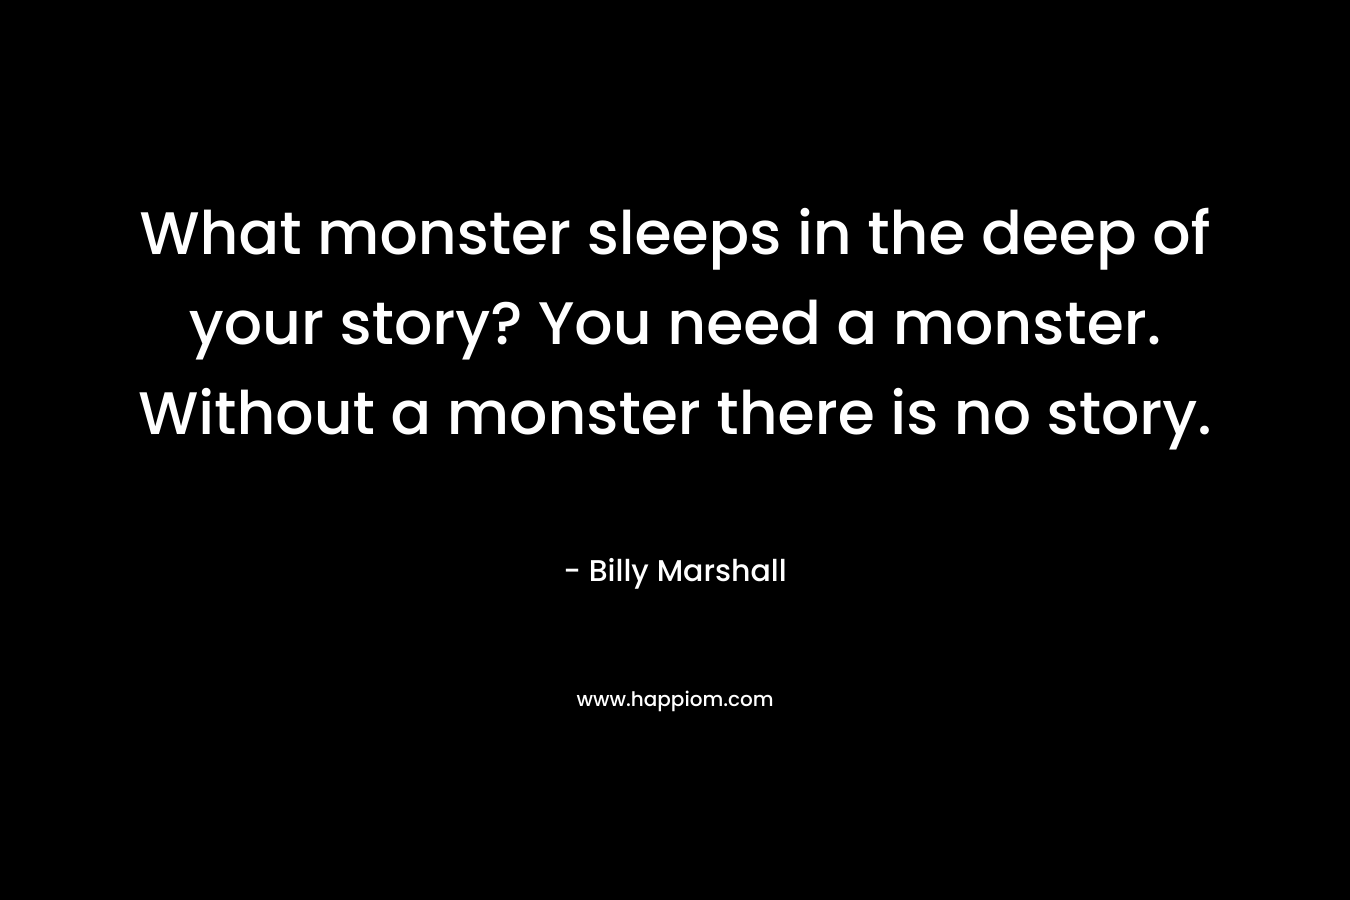 What monster sleeps in the deep of your story? You need a monster. Without a monster there is no story.